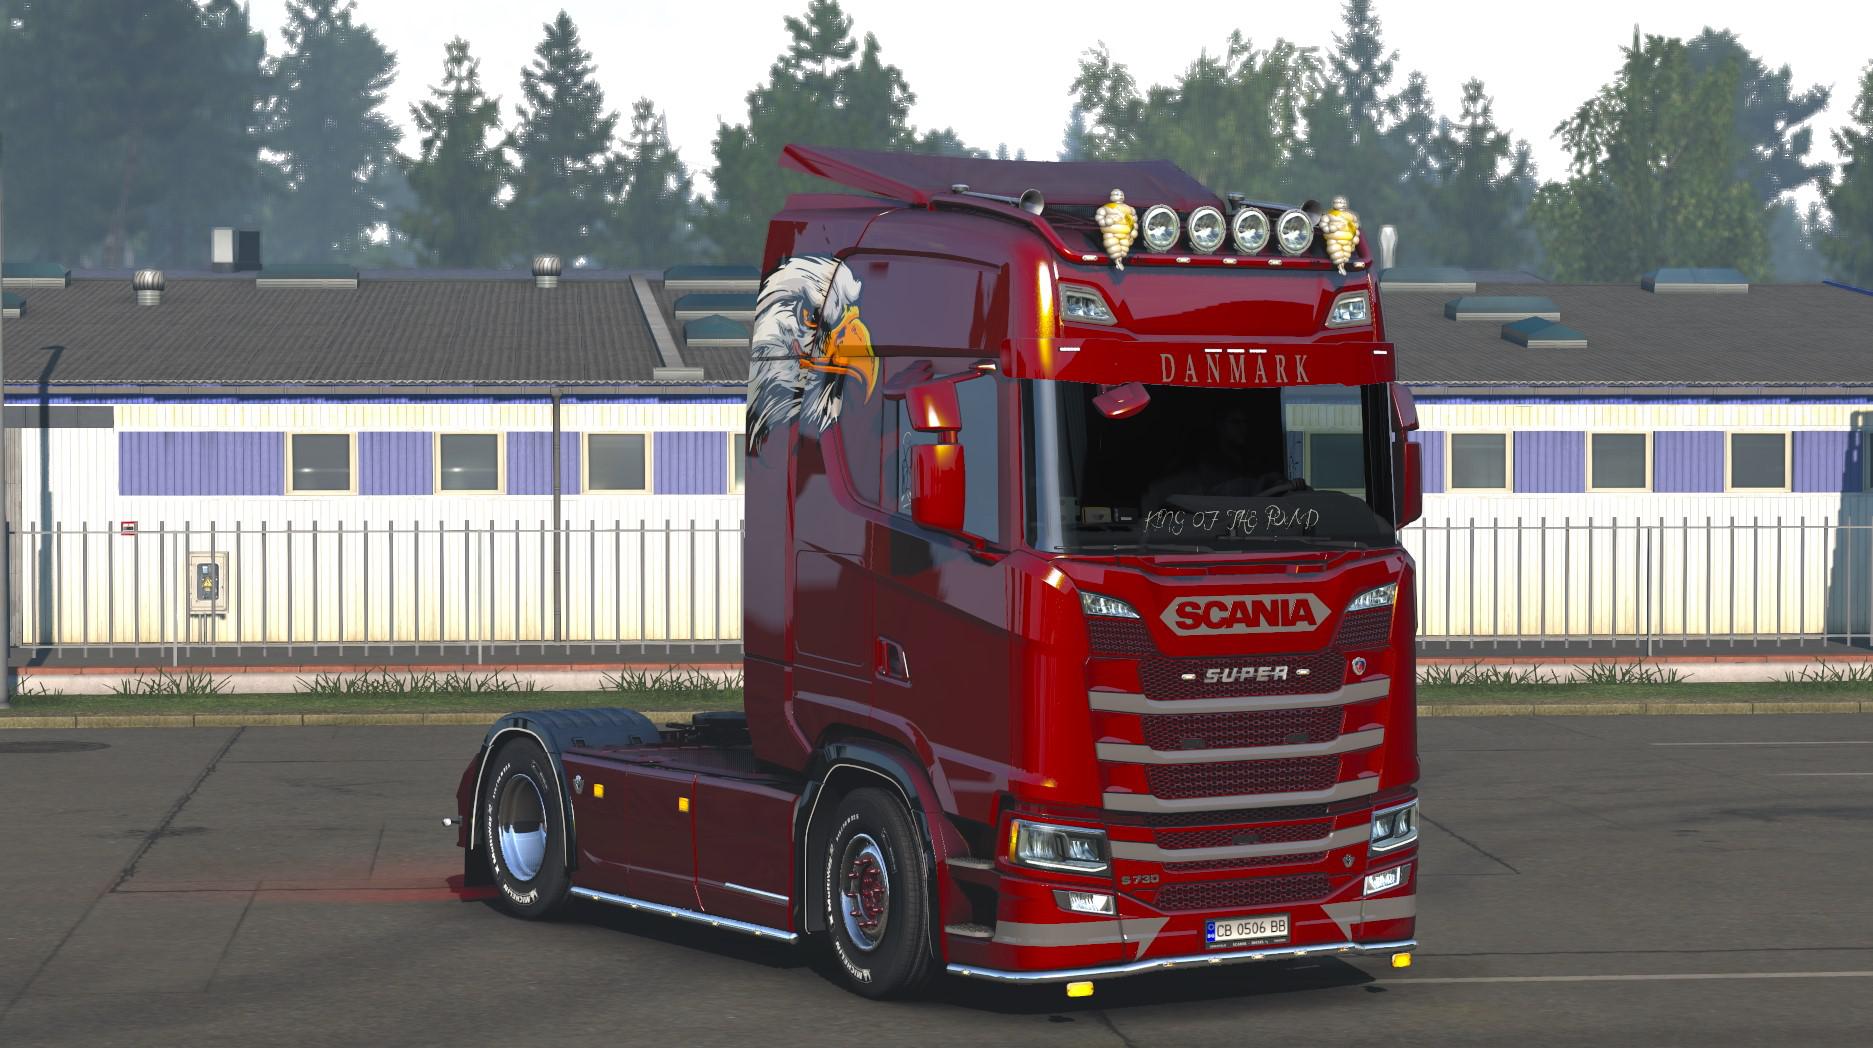 CHANGEABLE METALIC SKIN FOR SCANIA S HIGHT V1.0 - ETS 2 mods, Ets2 map